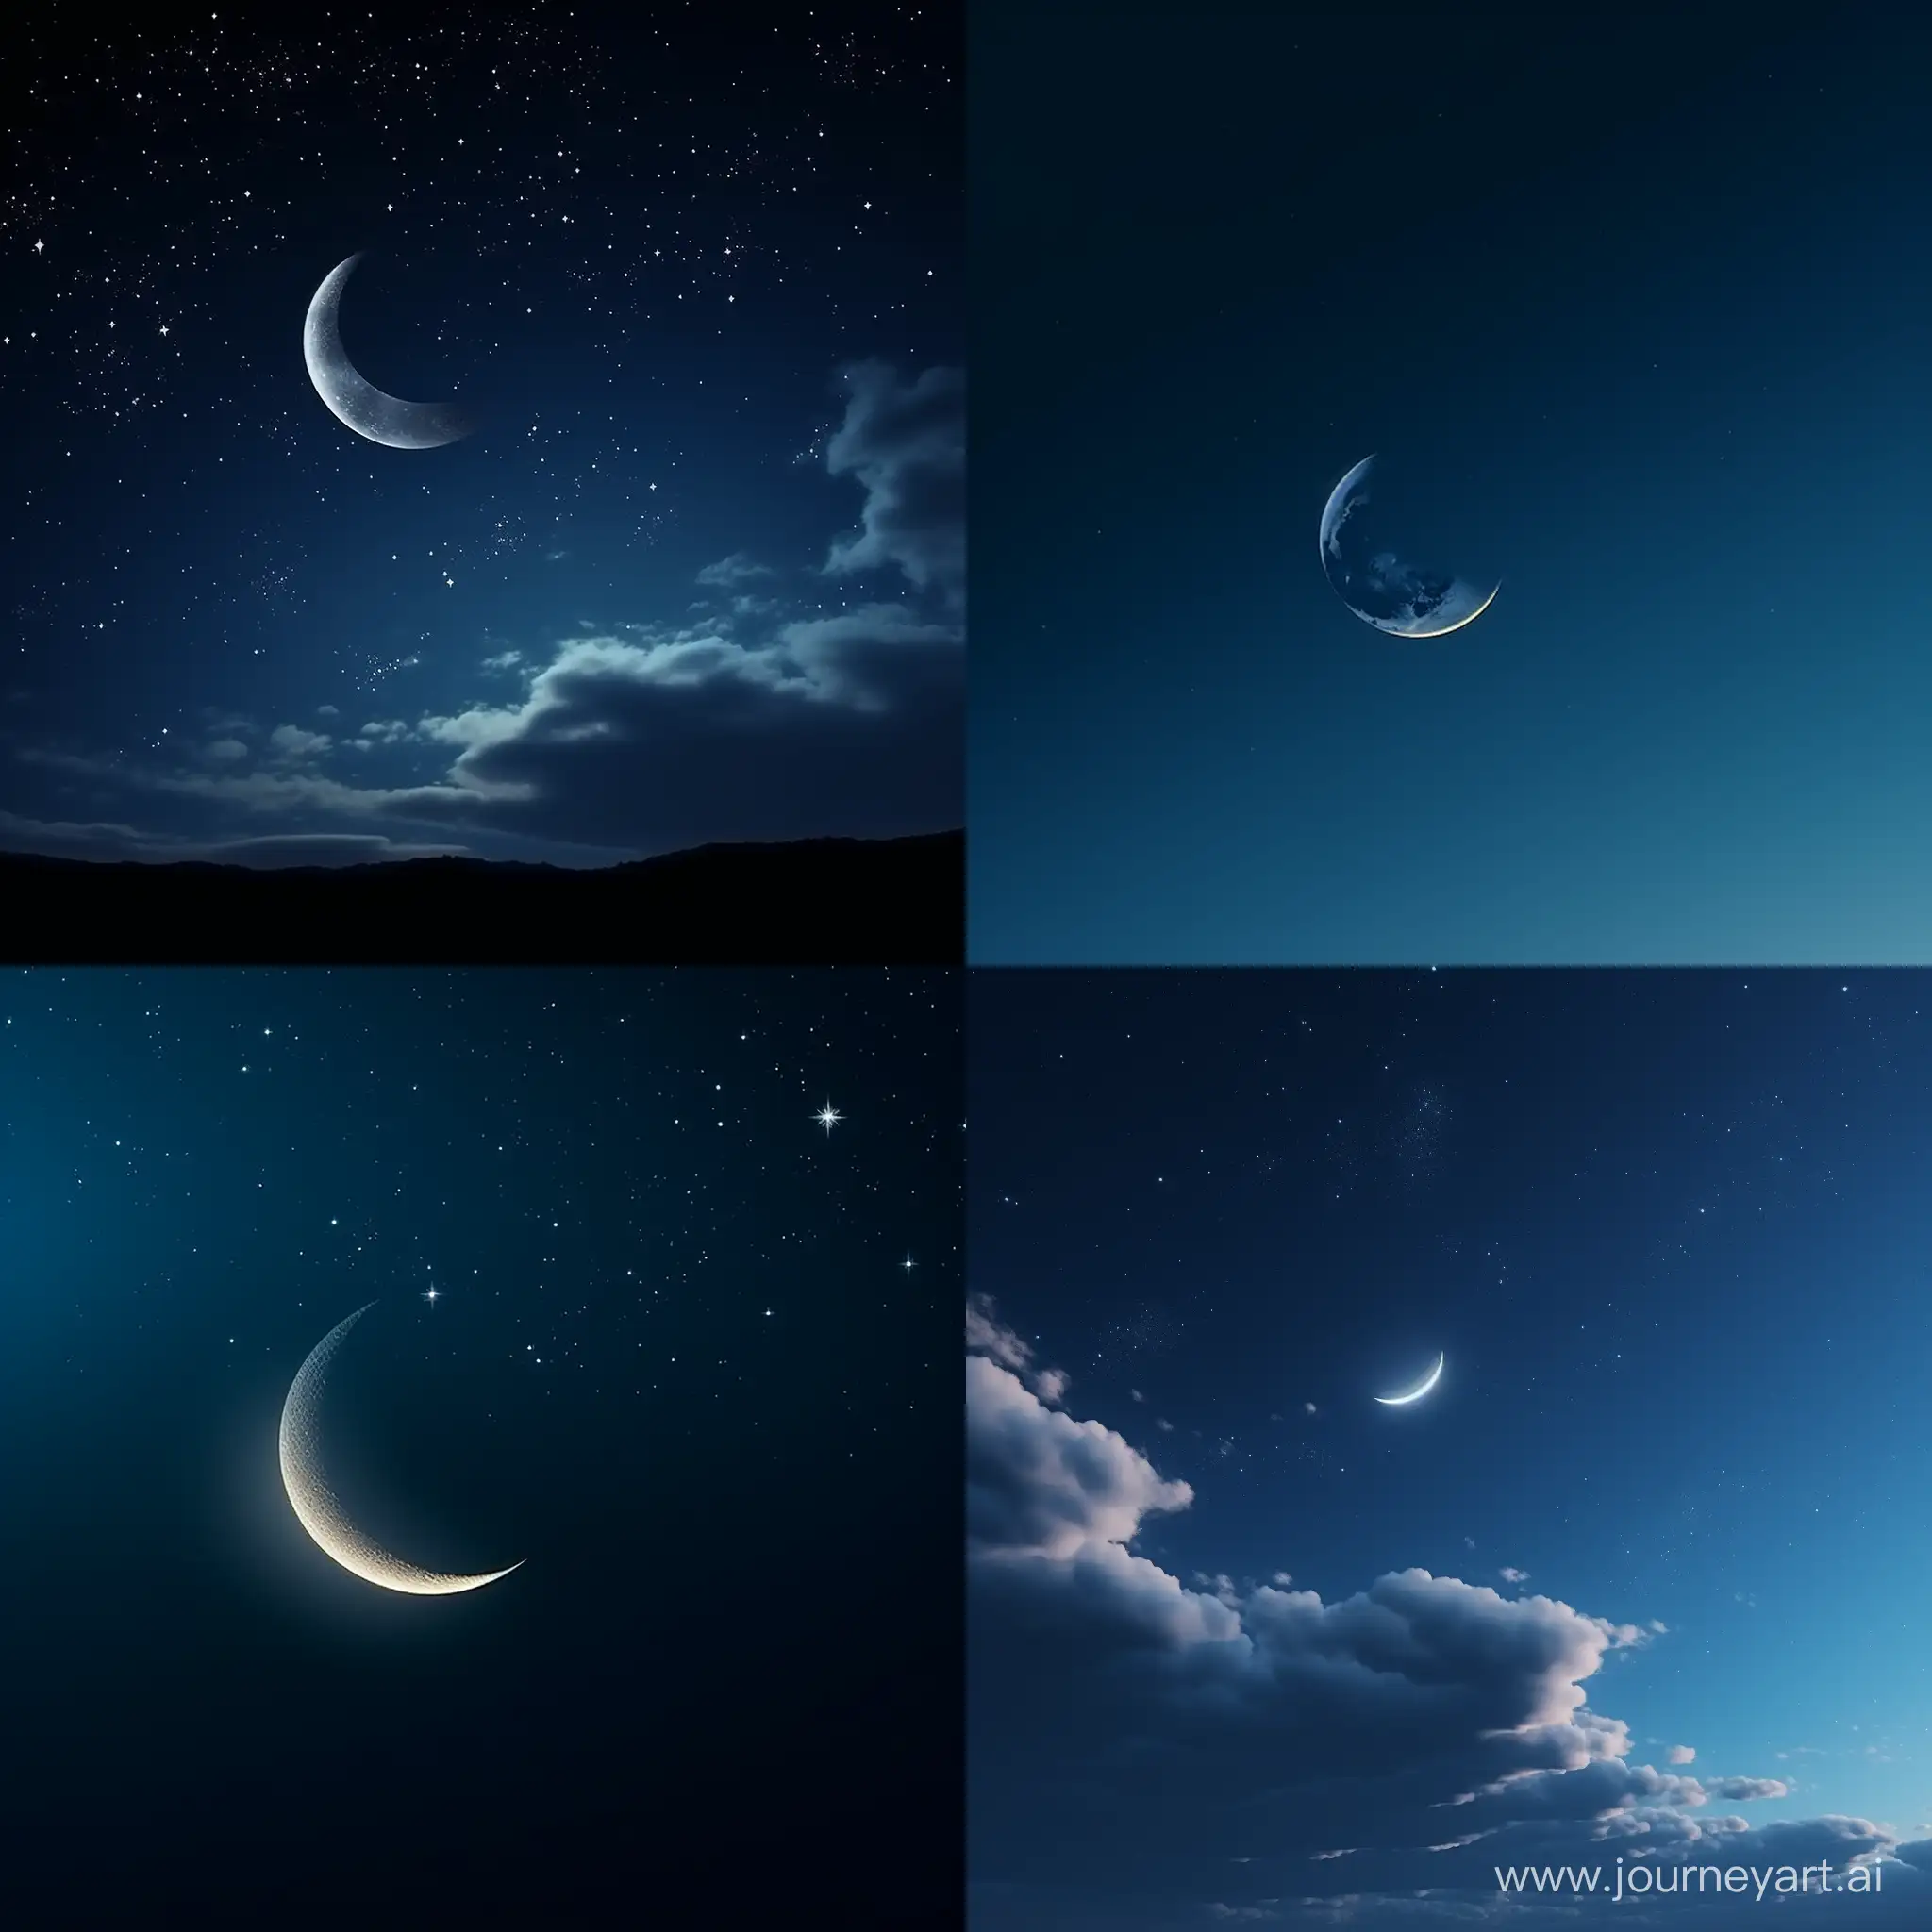 The navy blue sky stretched above, clear and cloudless. In the distance, the crescent moon adorned the sky, realistic photo,cinematic lighting, looking from the ground to the sky